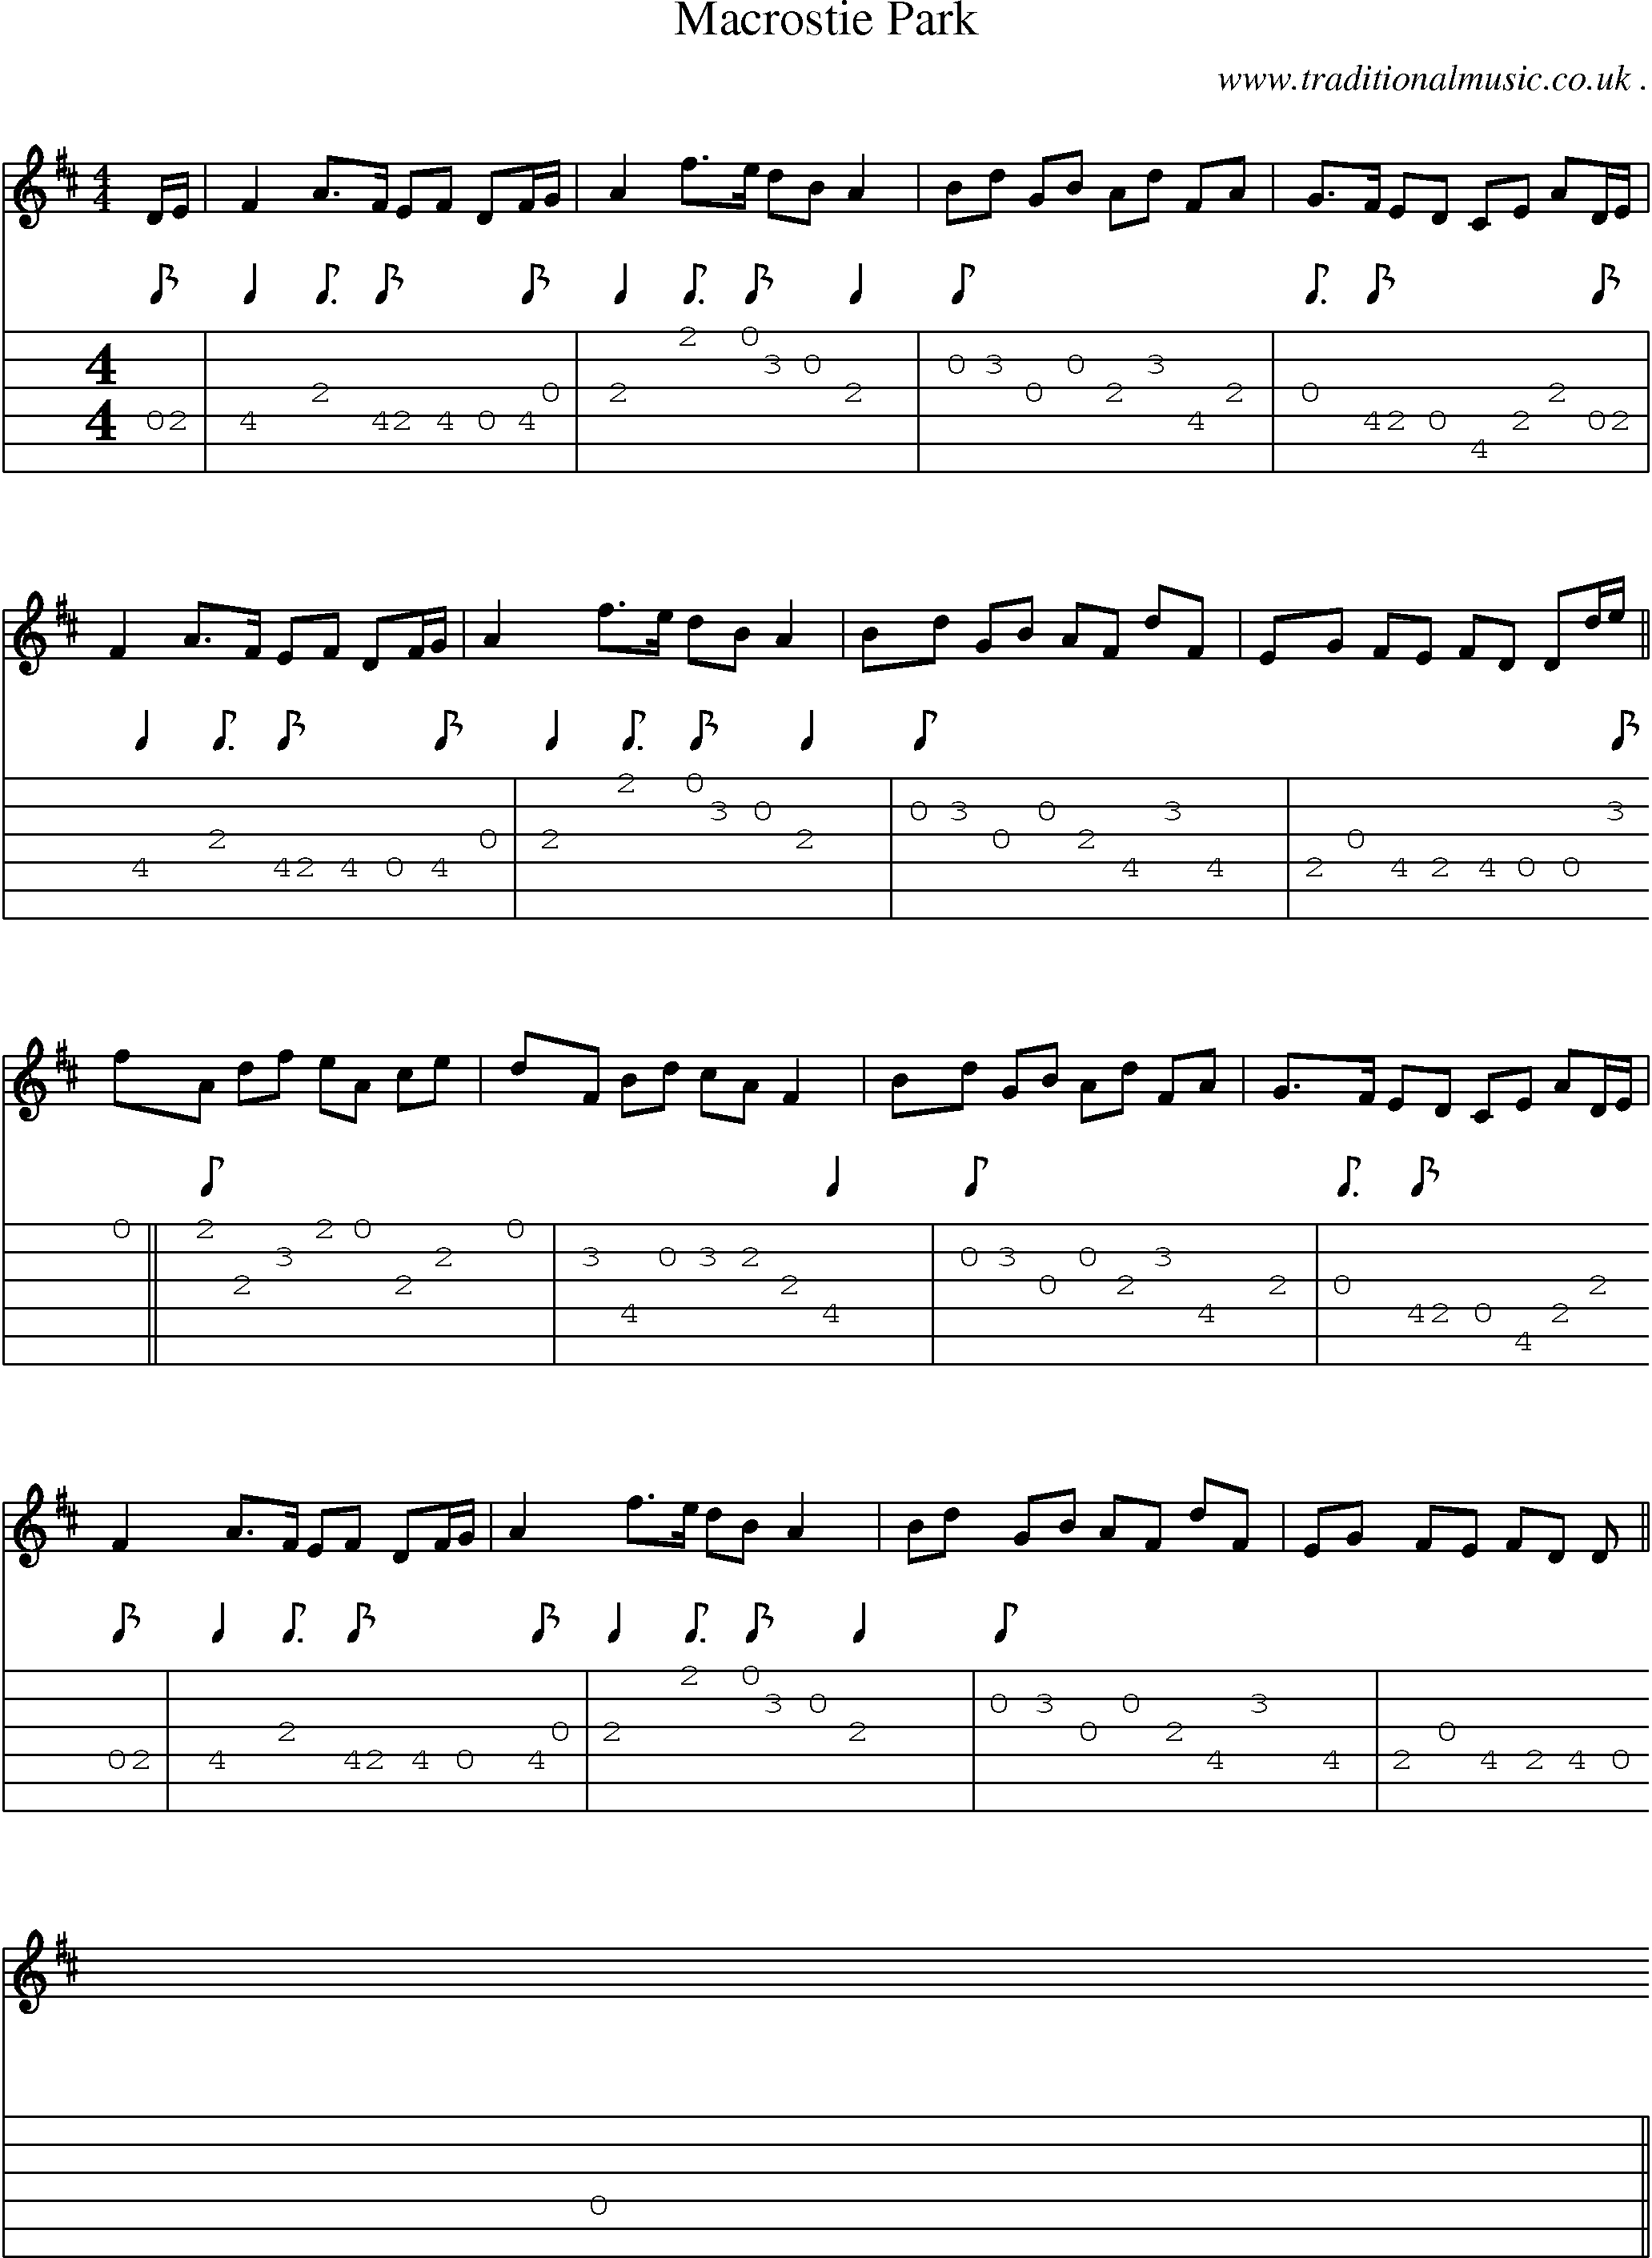 Sheet-music  score, Chords and Guitar Tabs for Macrostie Park